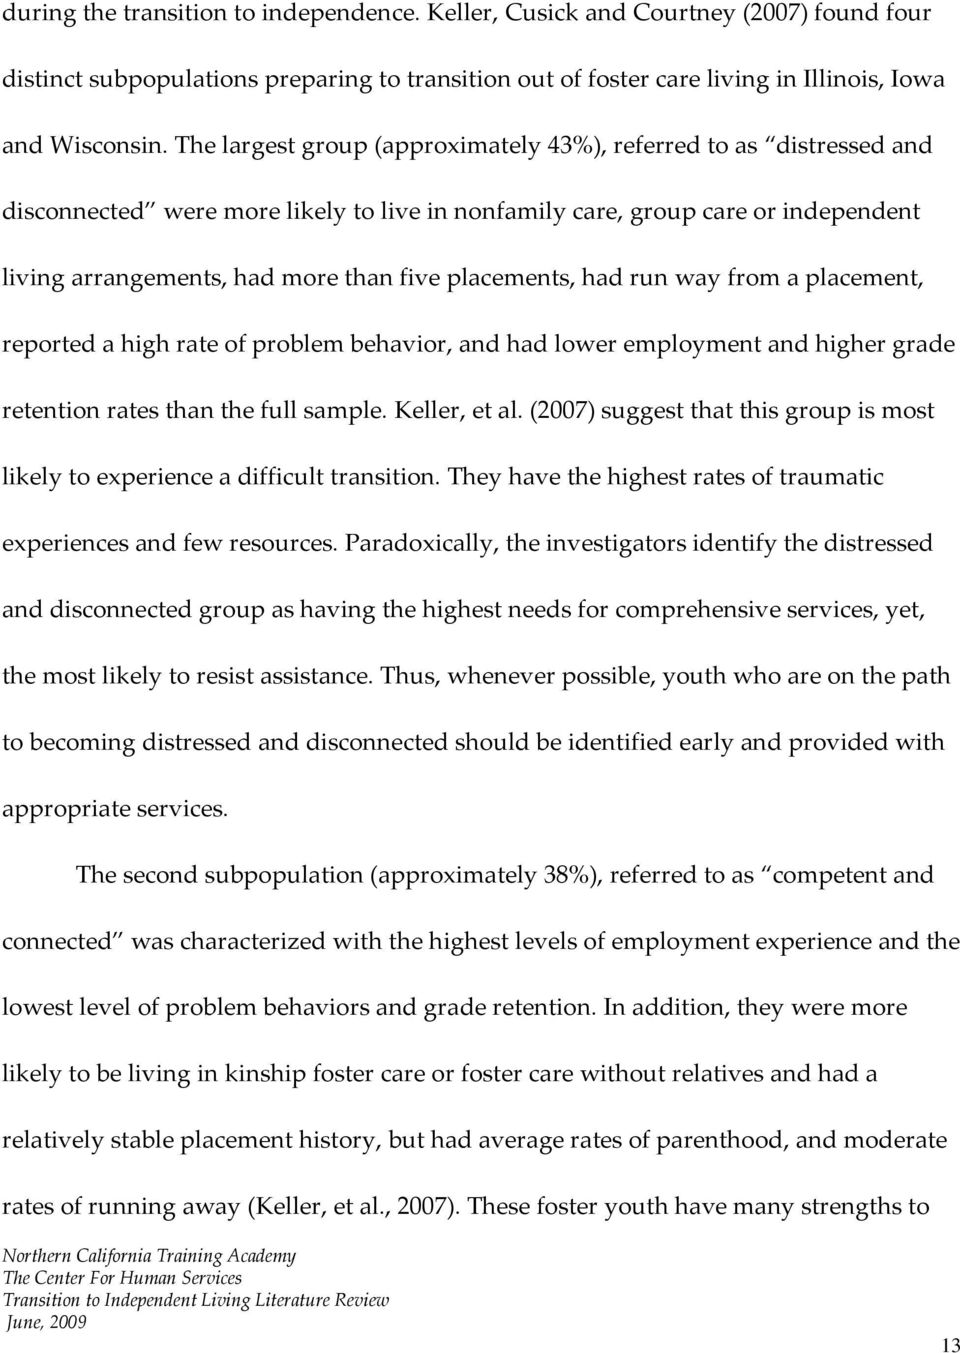 placements, had run way from a placement, reported a high rate of problem behavior, and had lower employment and higher grade retention rates than the full sample. Keller, et al.